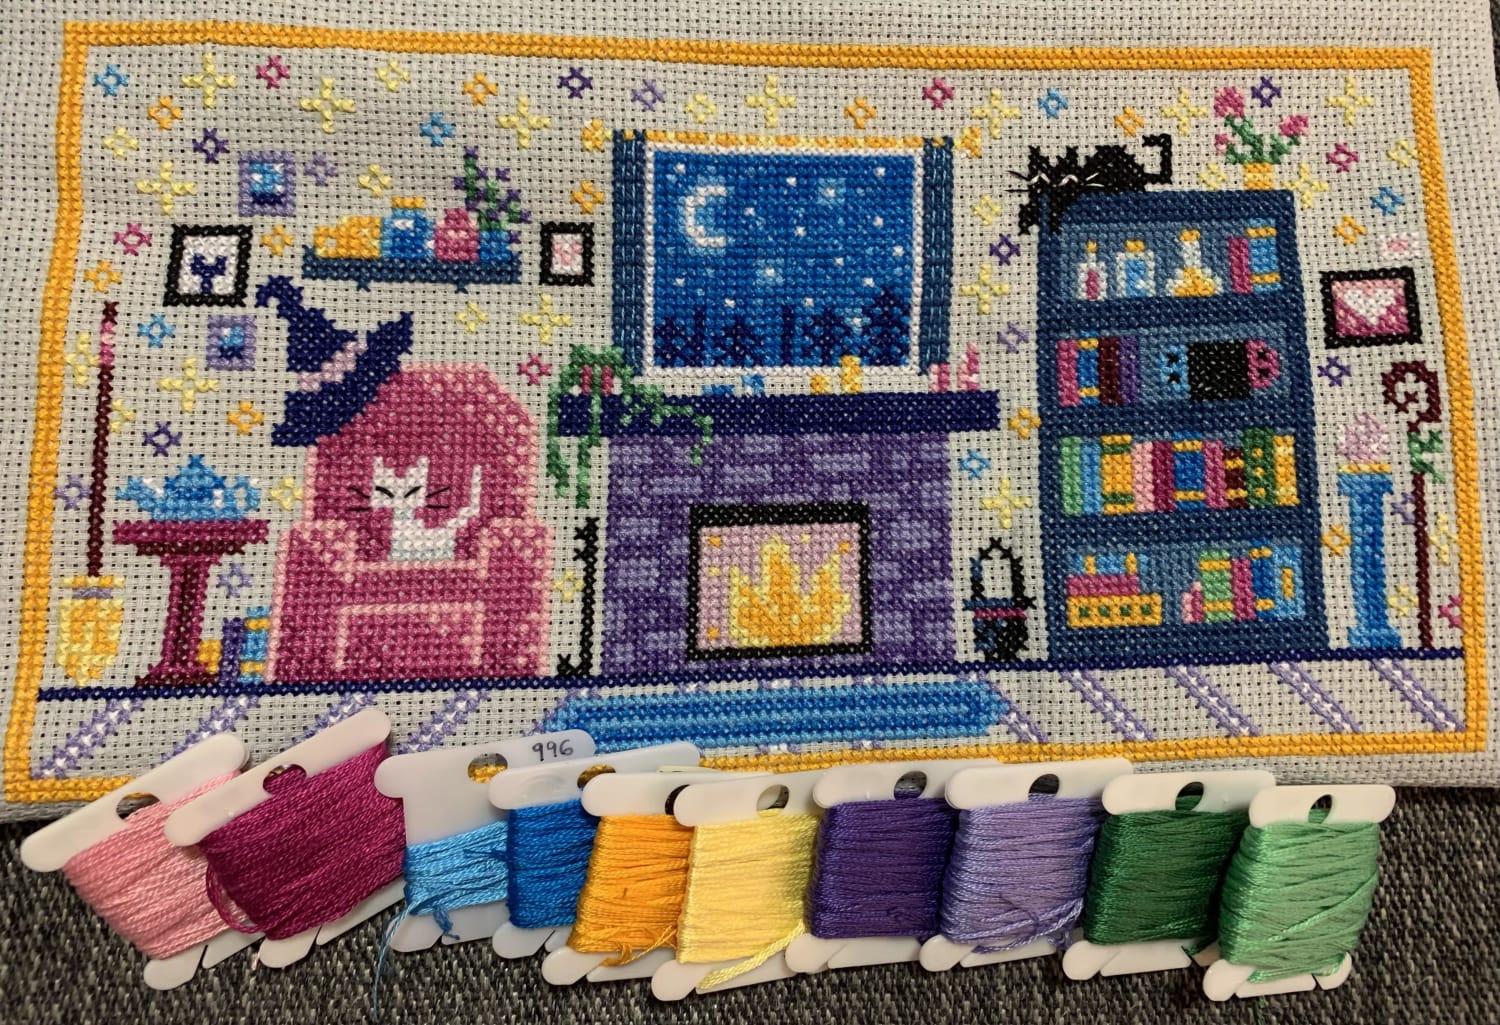 [FO] This one was really fun to do. I liked the idea of a happy witch with cute cats and a Nintendo switch on the shelf. Self-drafted.